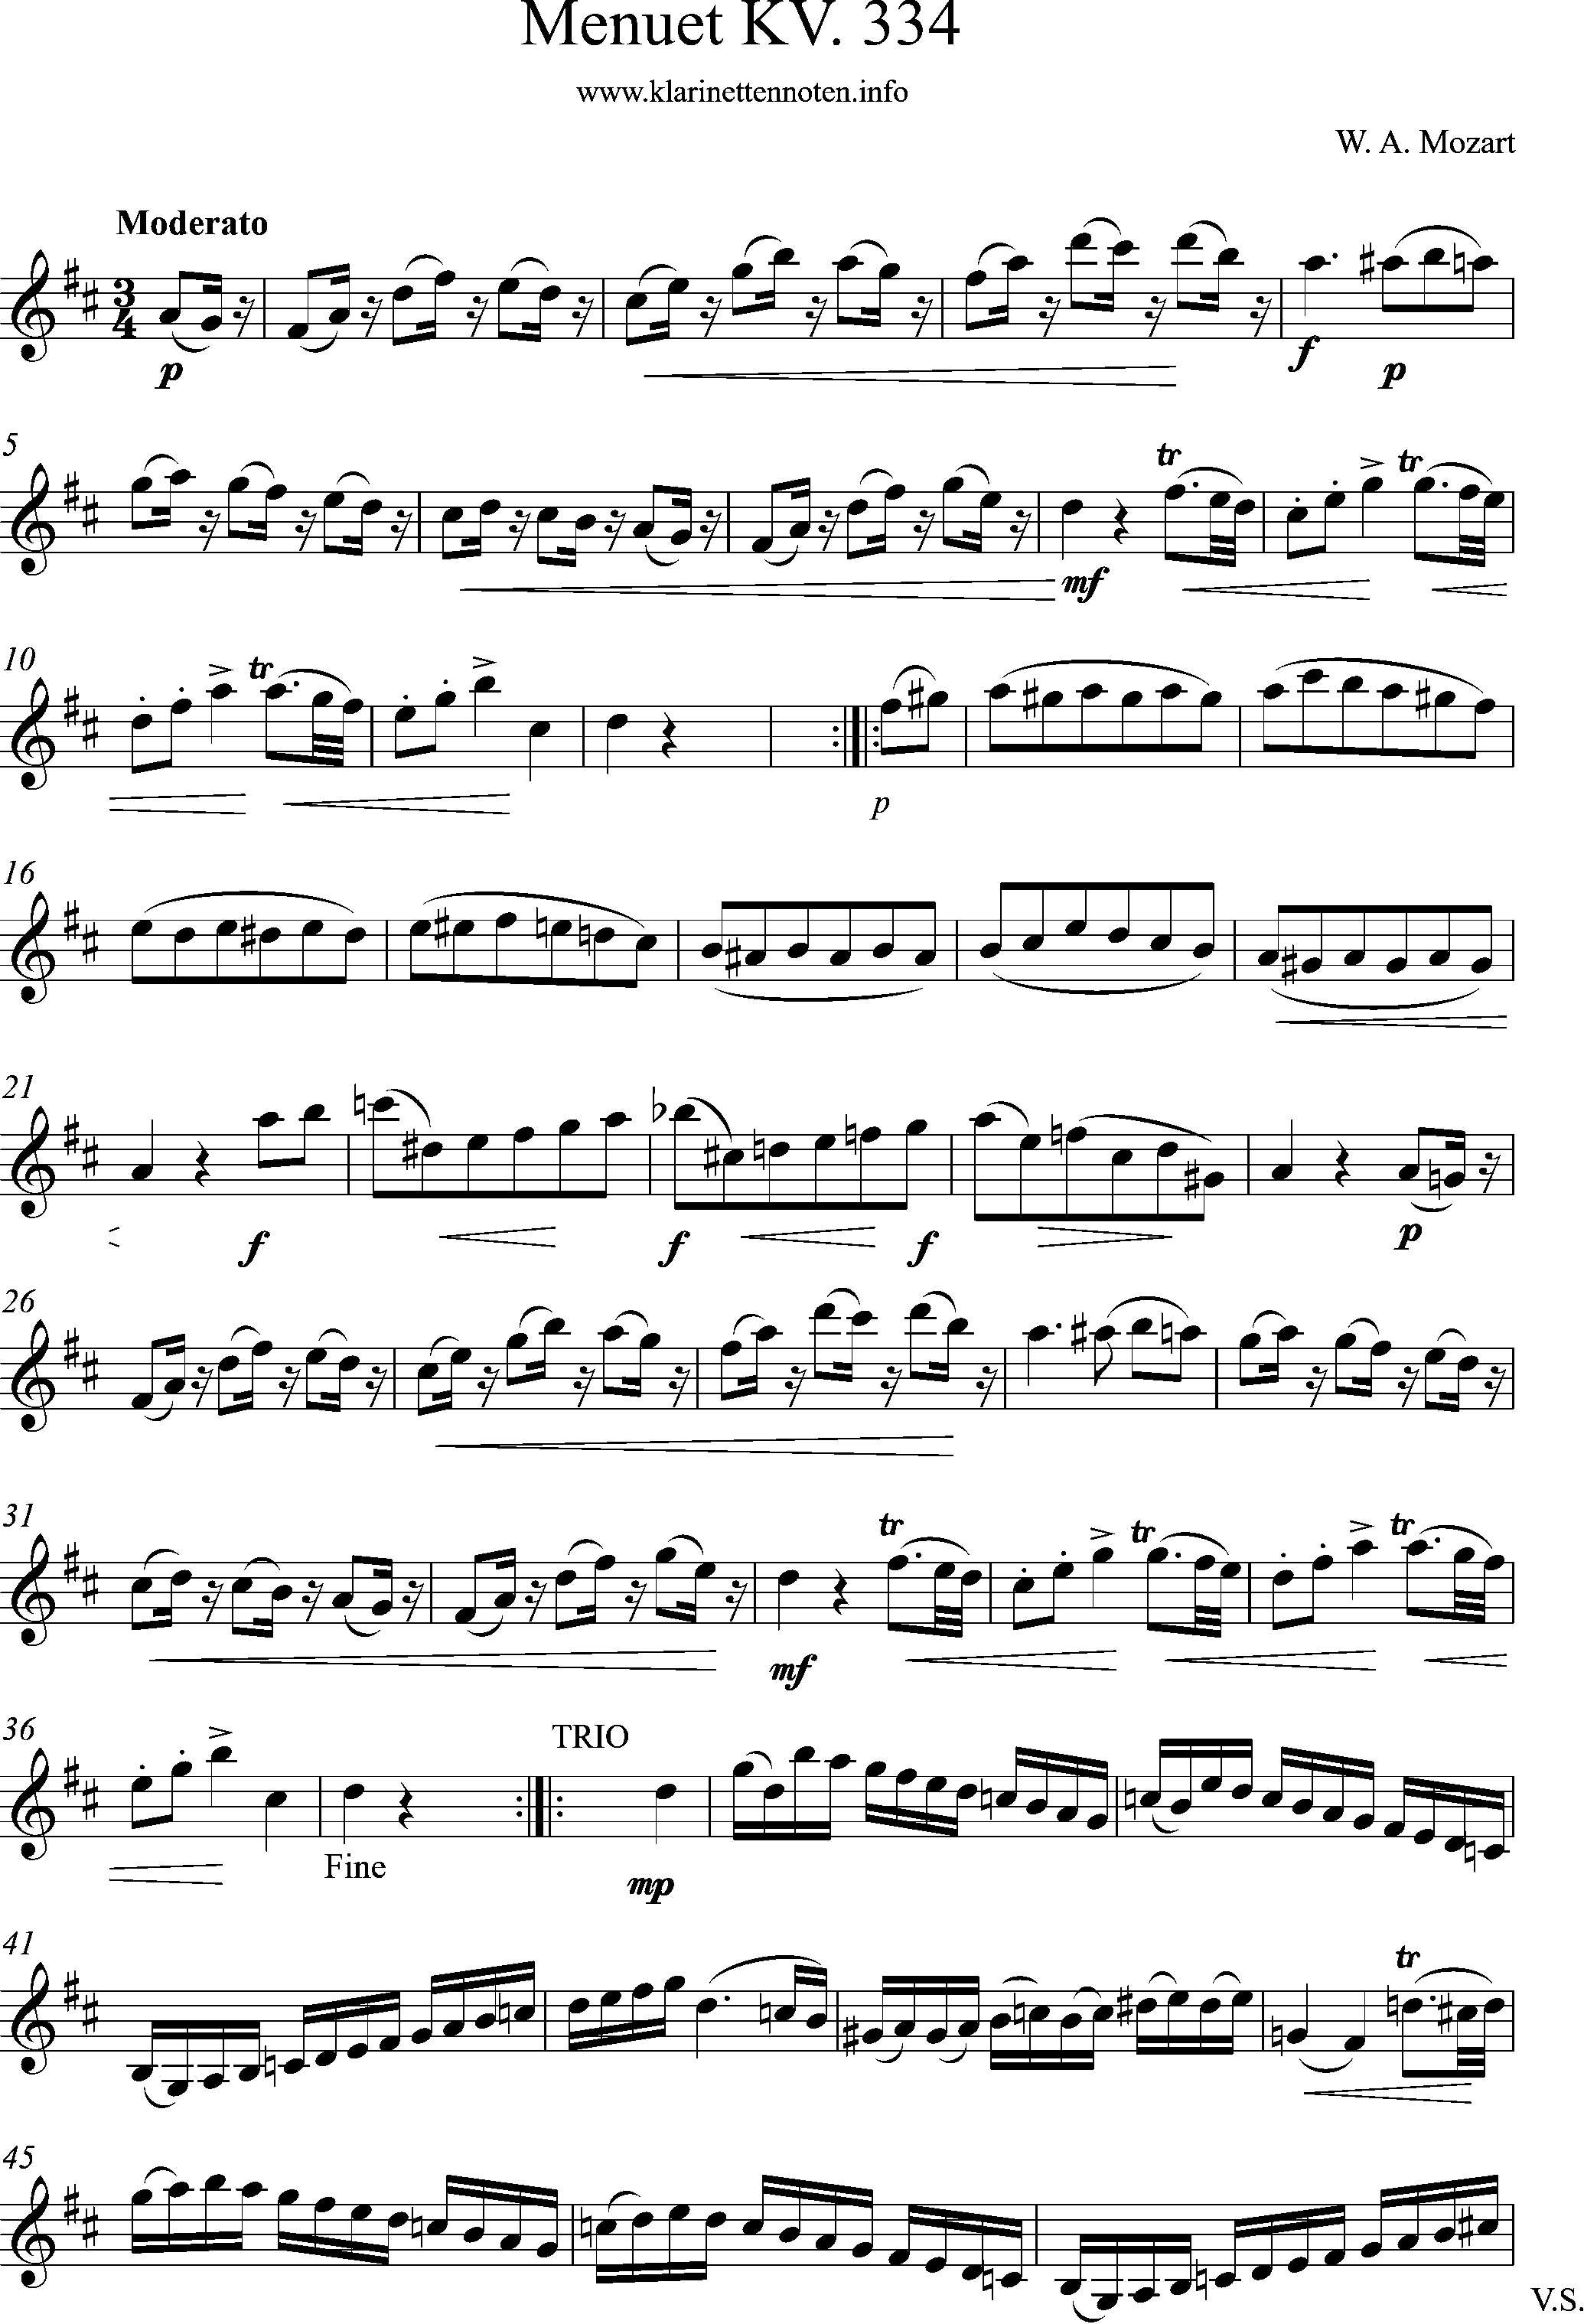 sheetmusic for Violin, Menuetto in D, Page 1